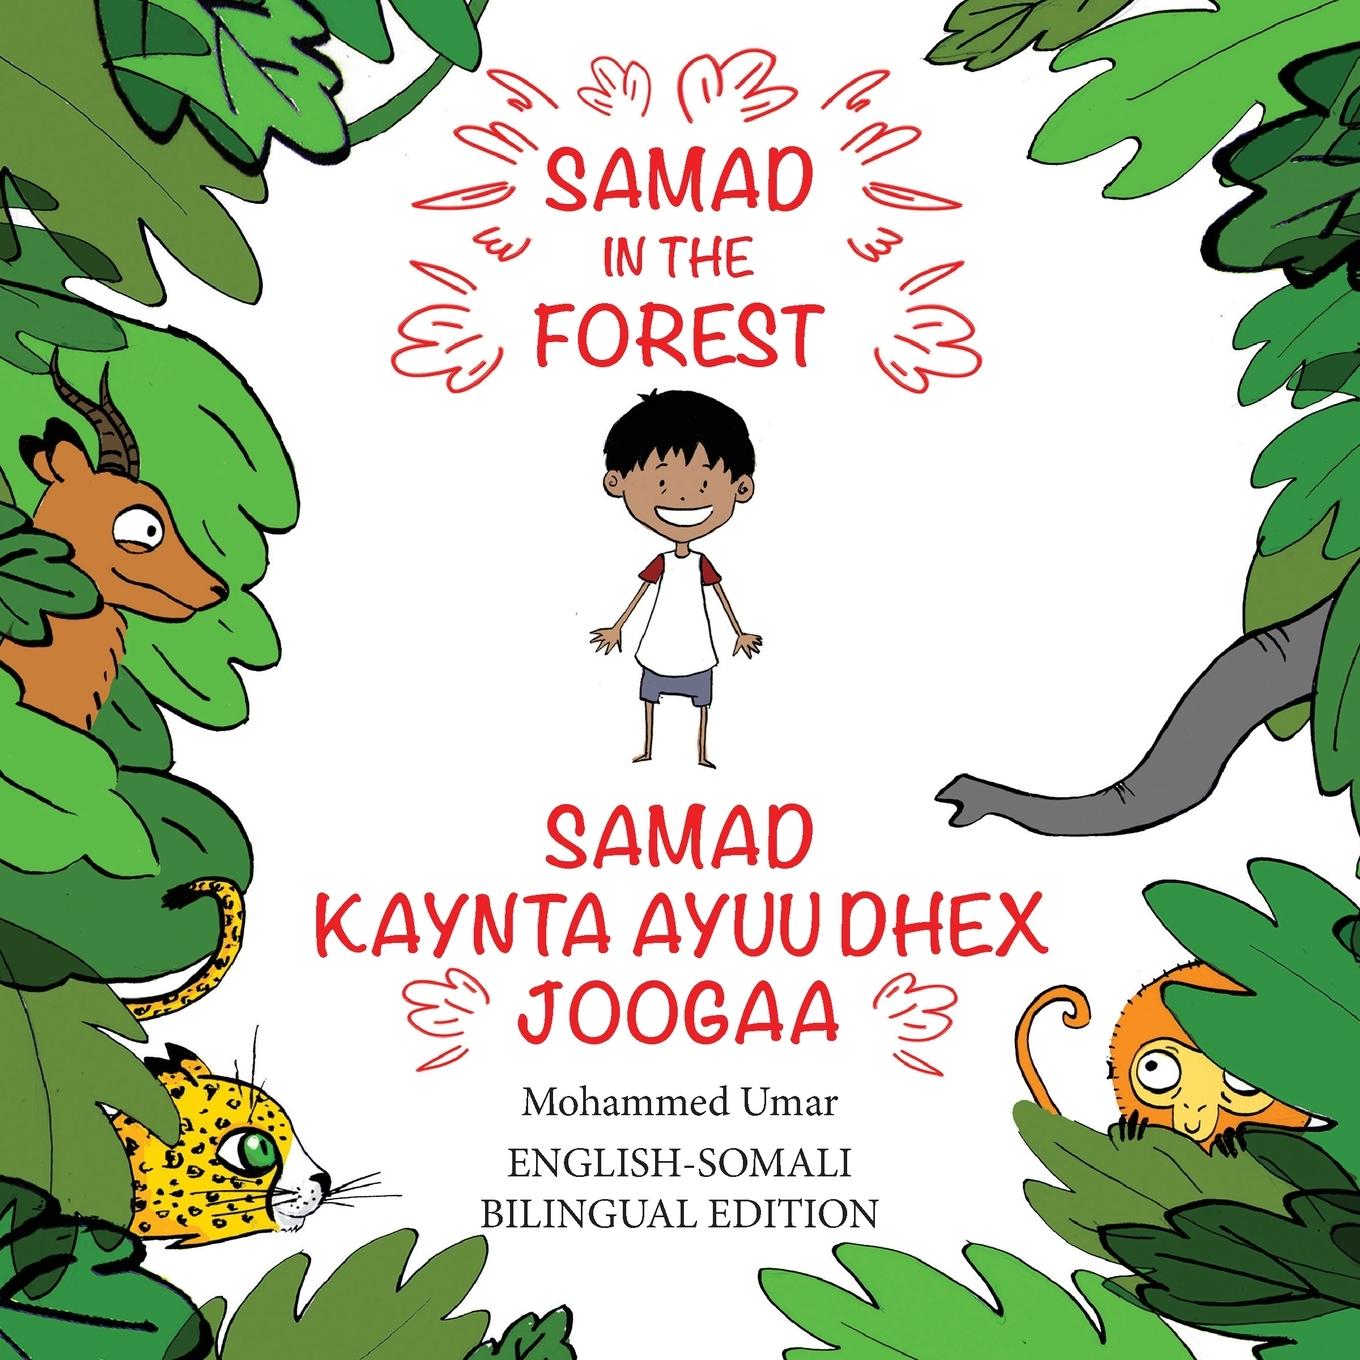 Book Samad in the Forest: English - Somali Bilingual Edition 